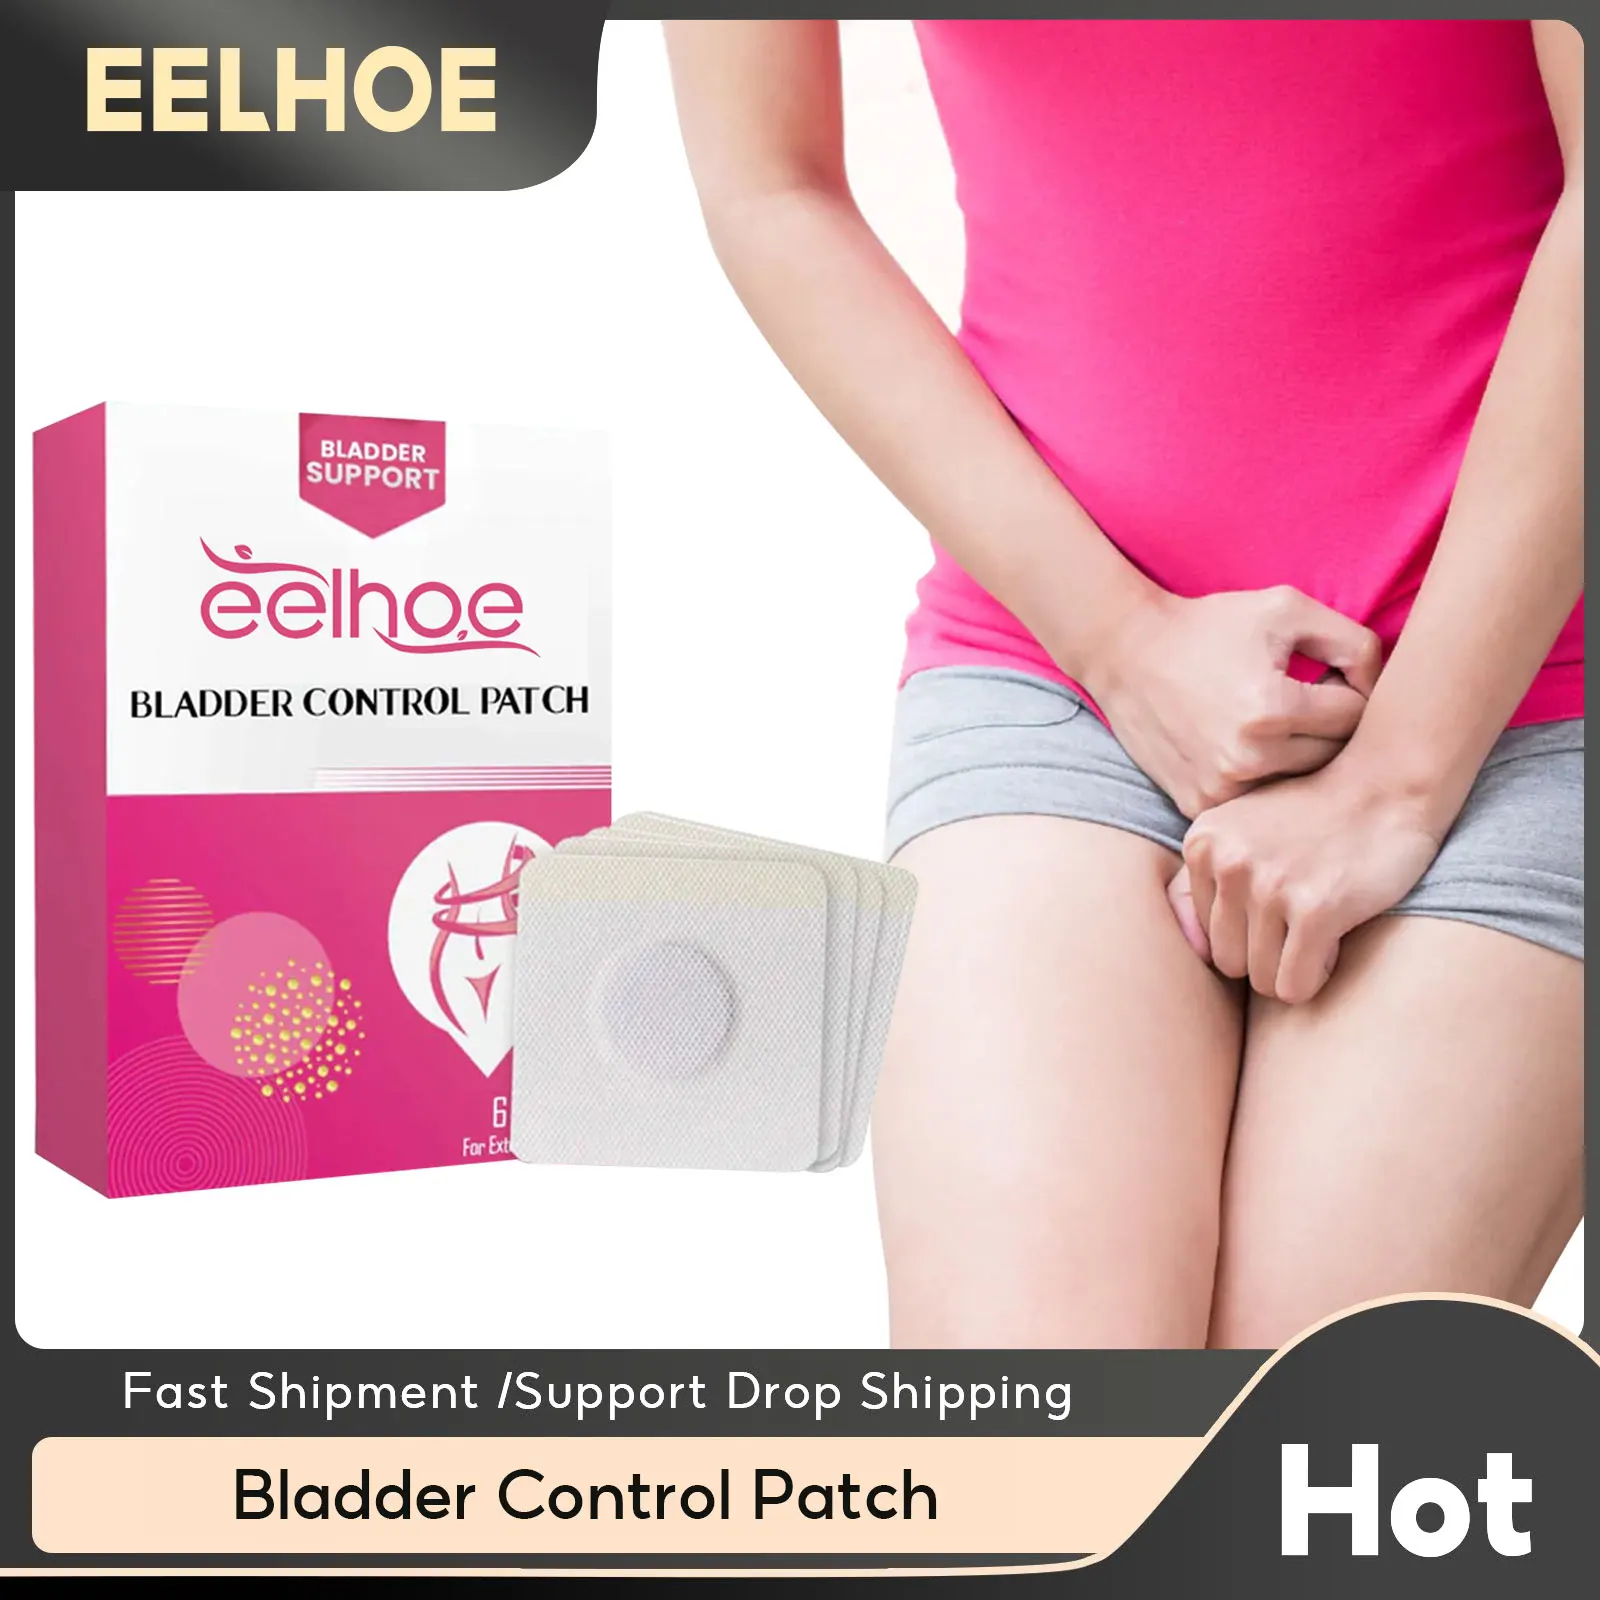 Urine Leakage Patches For Women Relieve Frequent Urinary Incontinence Herbs Chinese Medicines Profuse Urination Control Stickers urinary incontinence magchair ems pelvic floor muscle stimulator massage women s postpartum repair chair